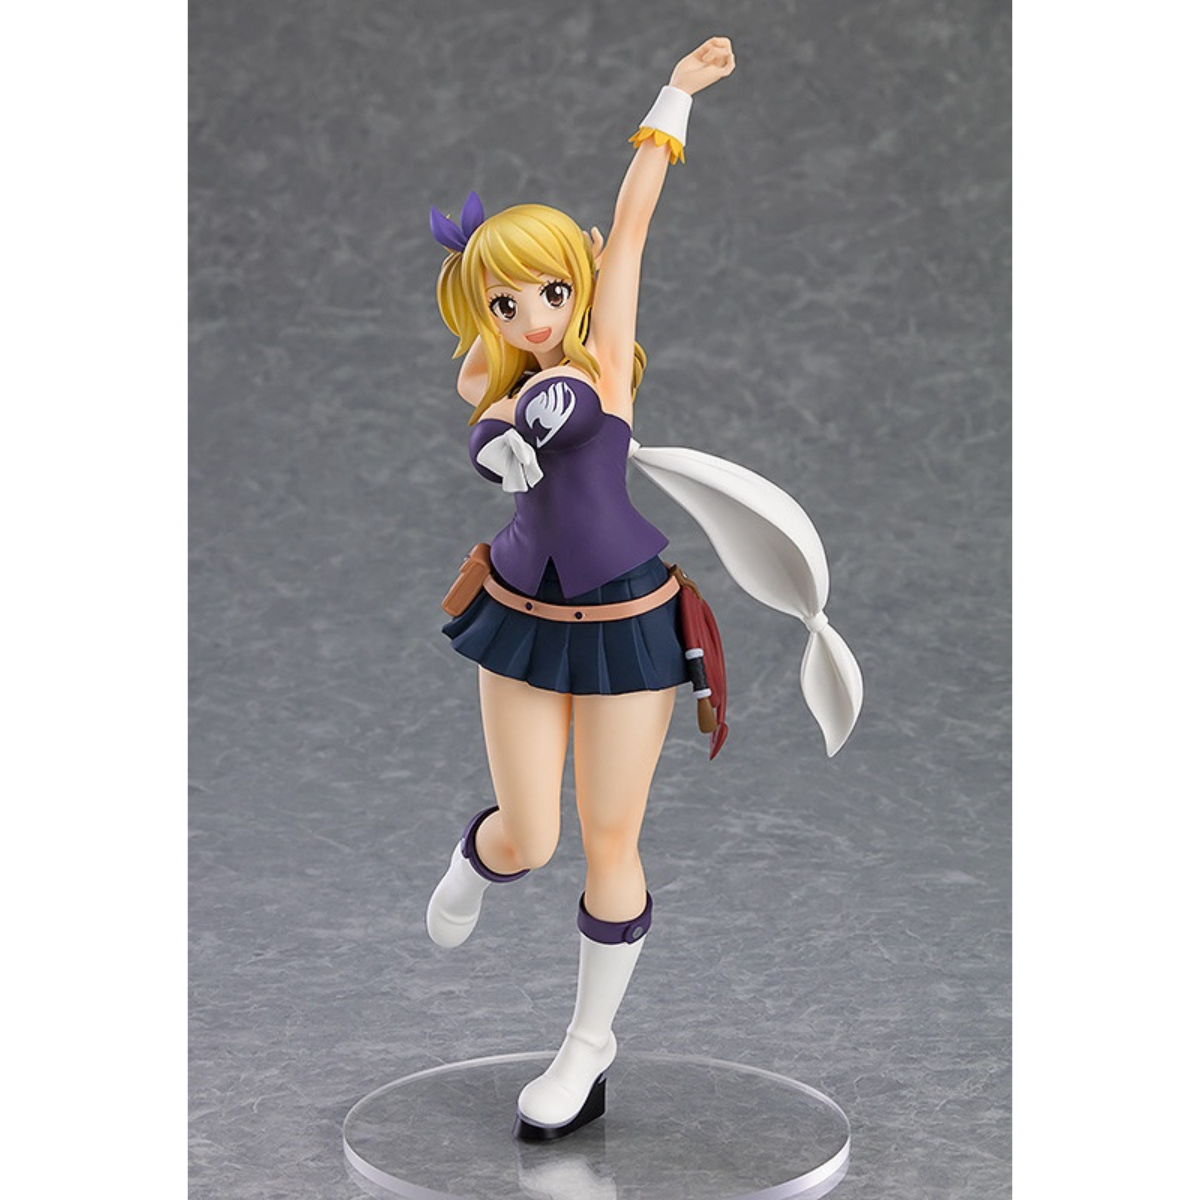 Fairy Tail Pop Up Parade "Lucy Heartfilia" (Grand Magic Royale Ver. )-Good Smile Company-Ace Cards & Collectibles